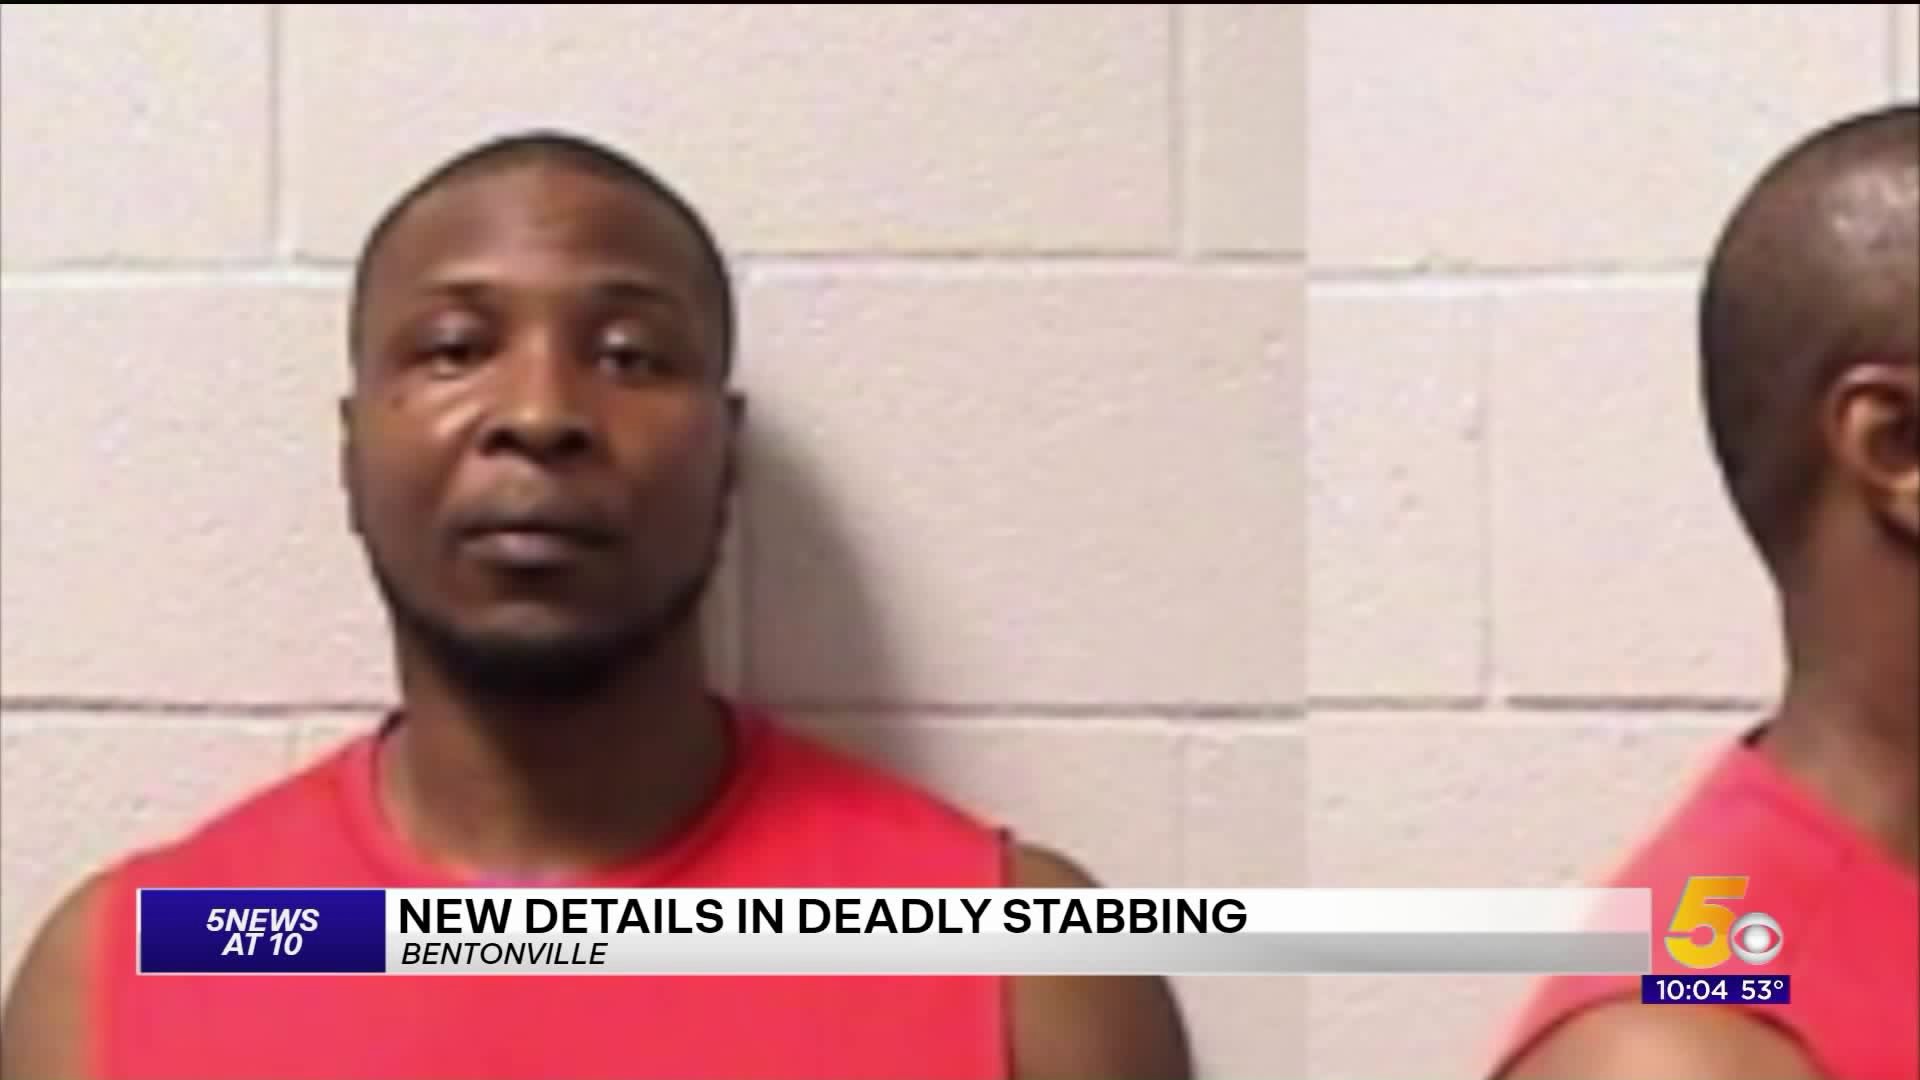 Rogers Man Faces Capital Murder Charges In Fatal Stabbing